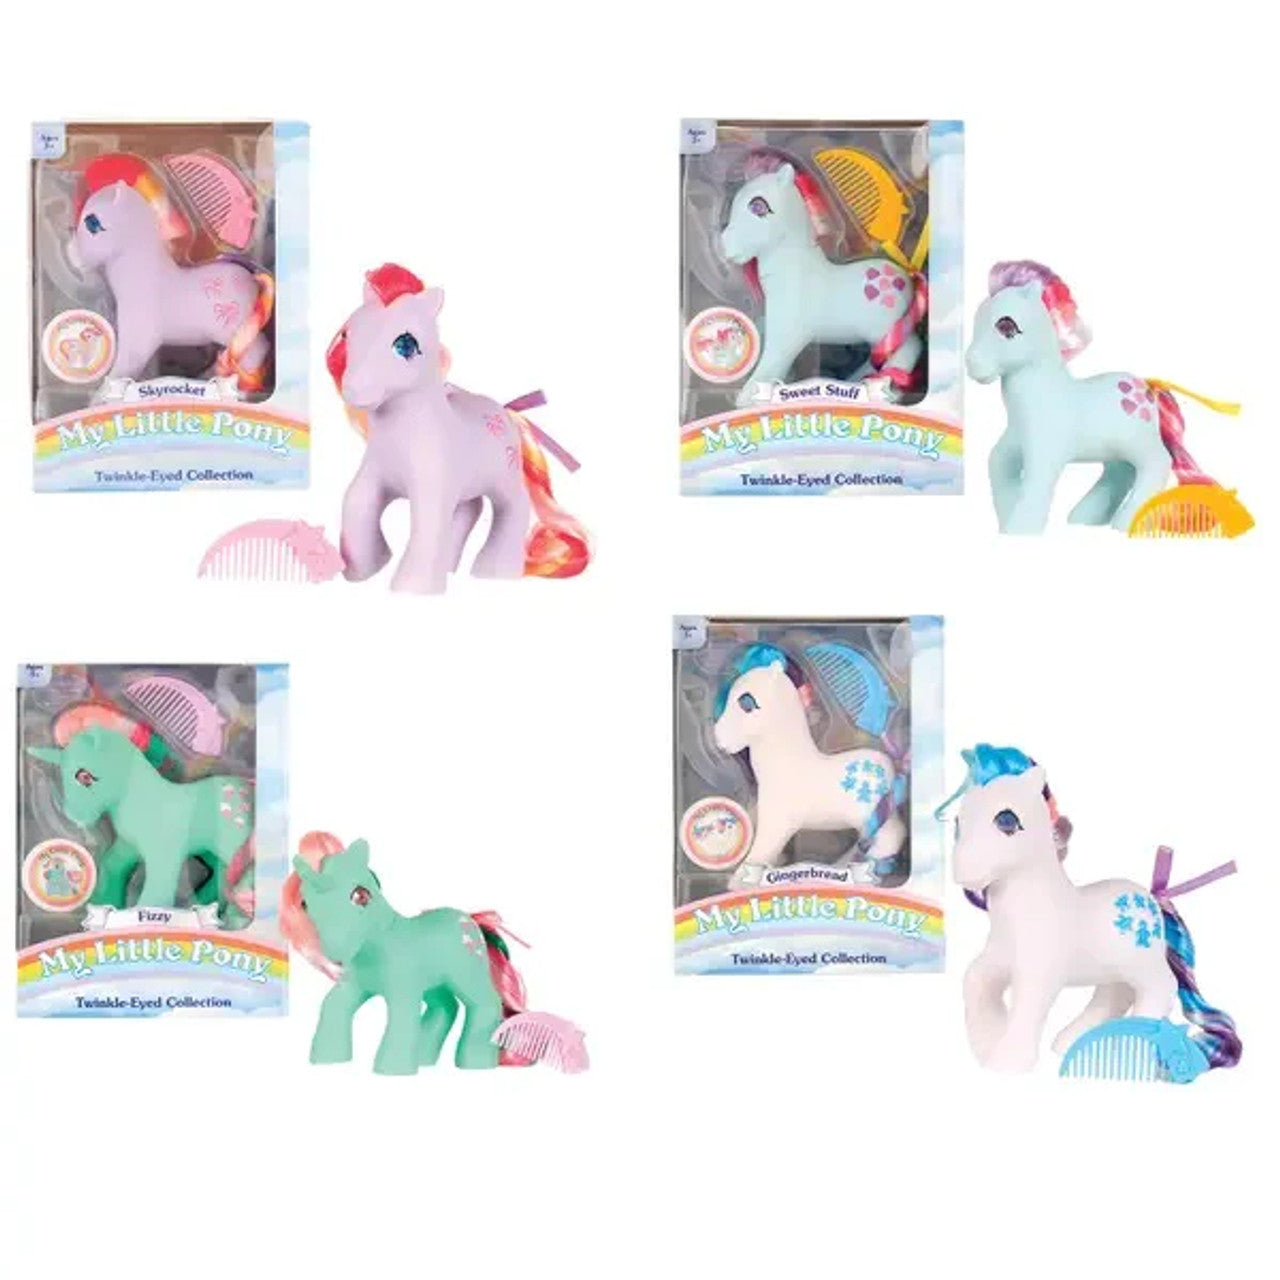 My Little Pony Twinkle-Eyed Collection Assortment by Schylling